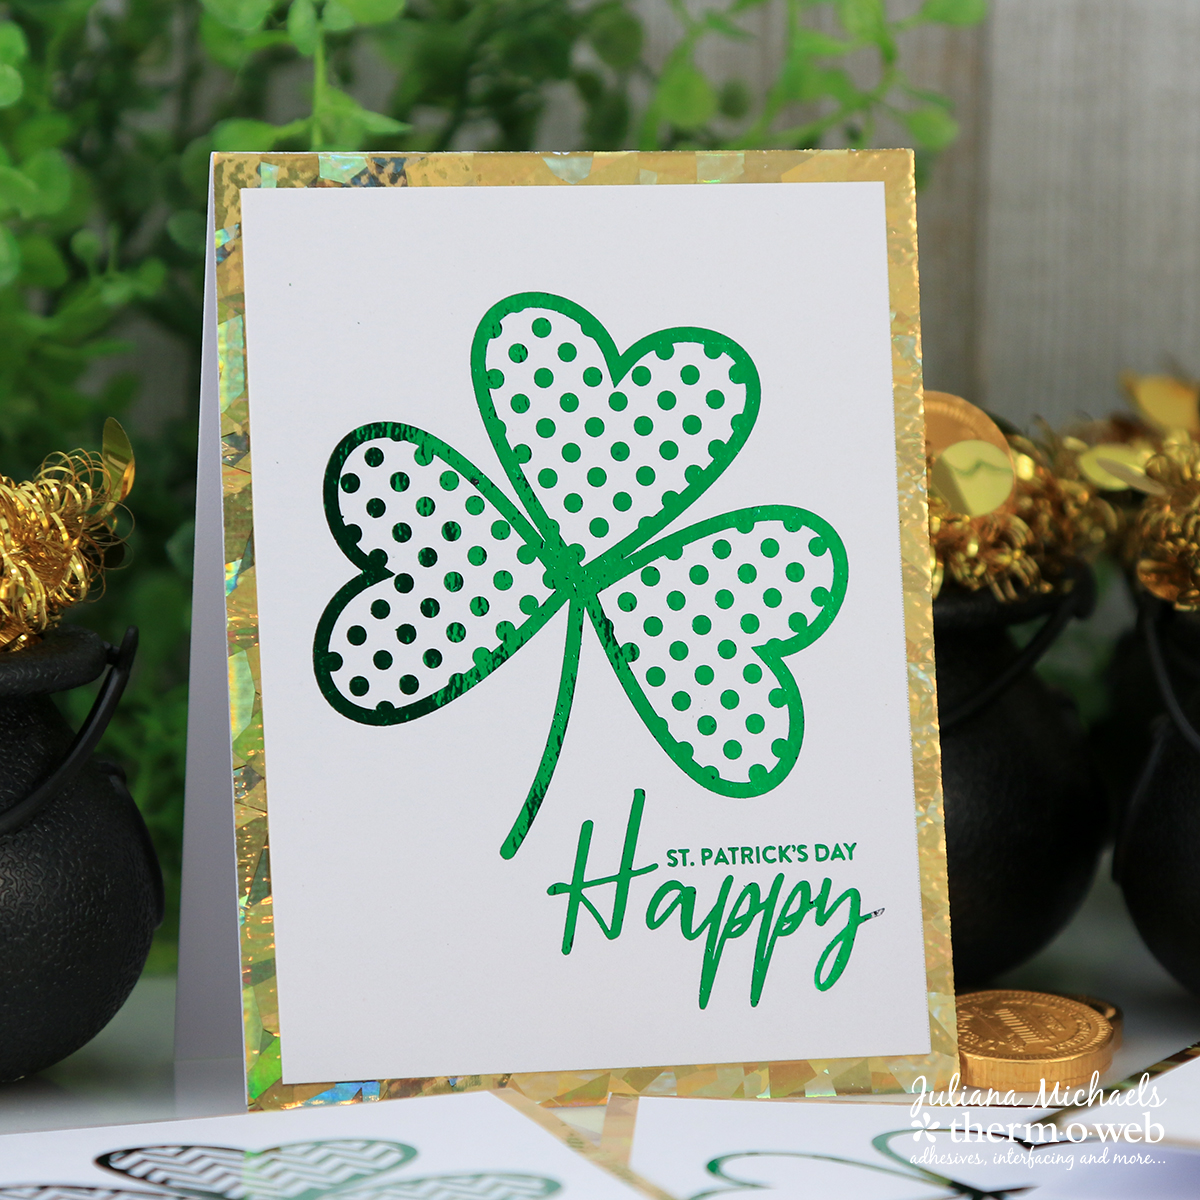 St. Patrick's Day Happy Card and Gift Set by Juliana Michaels featuring Therm O Web Deco Foil and Adhesives